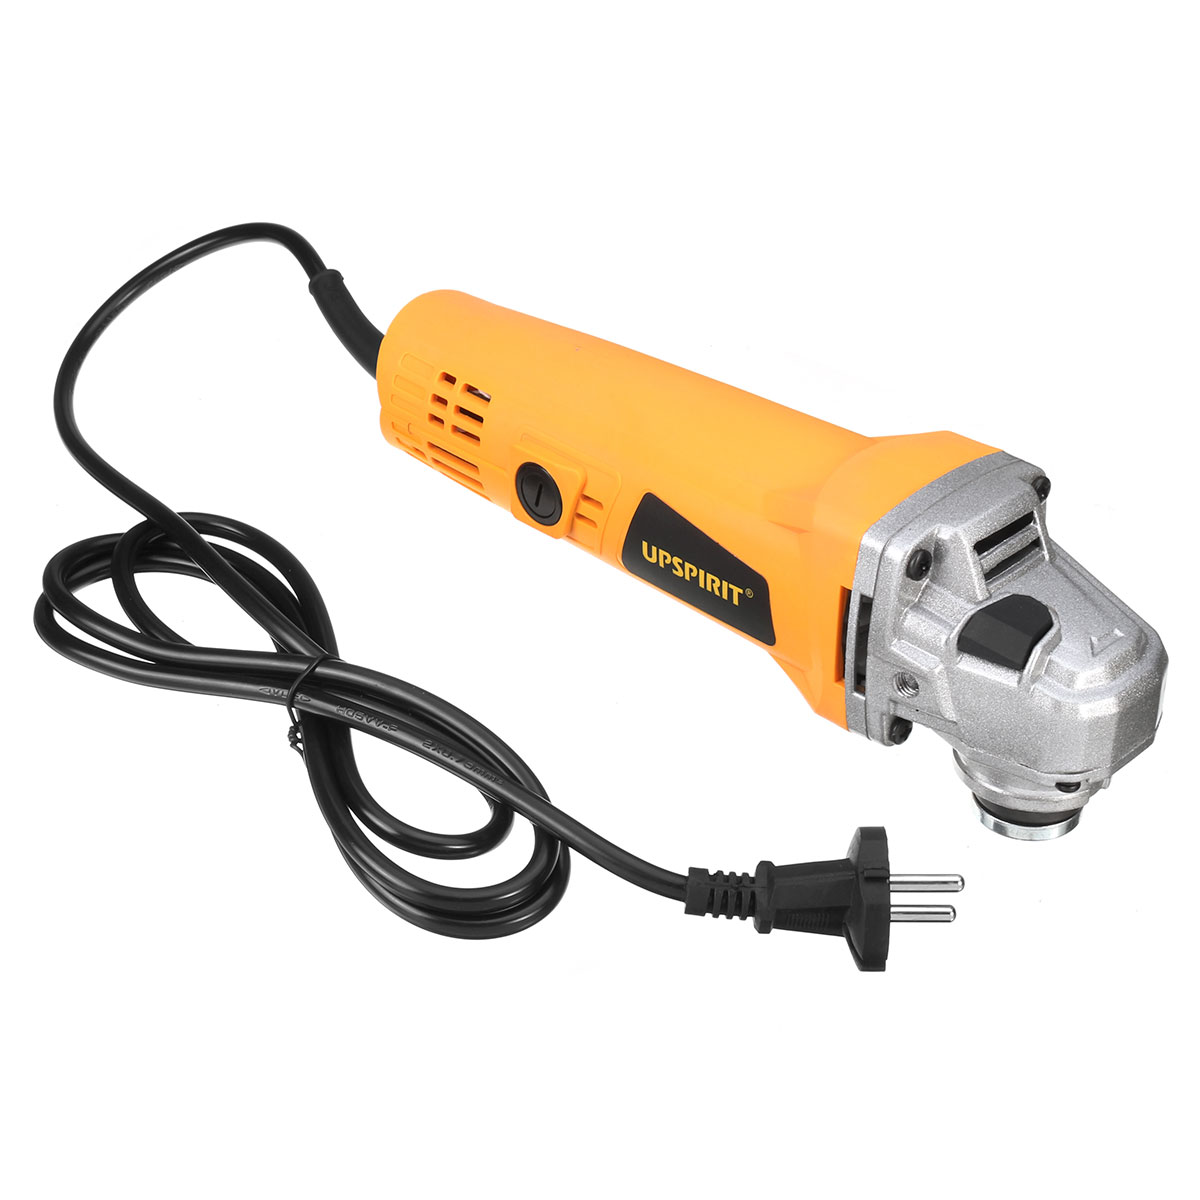 700W-Electric-Angle-Grinder-100mm-Polishing-Polisher-Grinding-Cutting-Tool-10000RPM-1560434-8